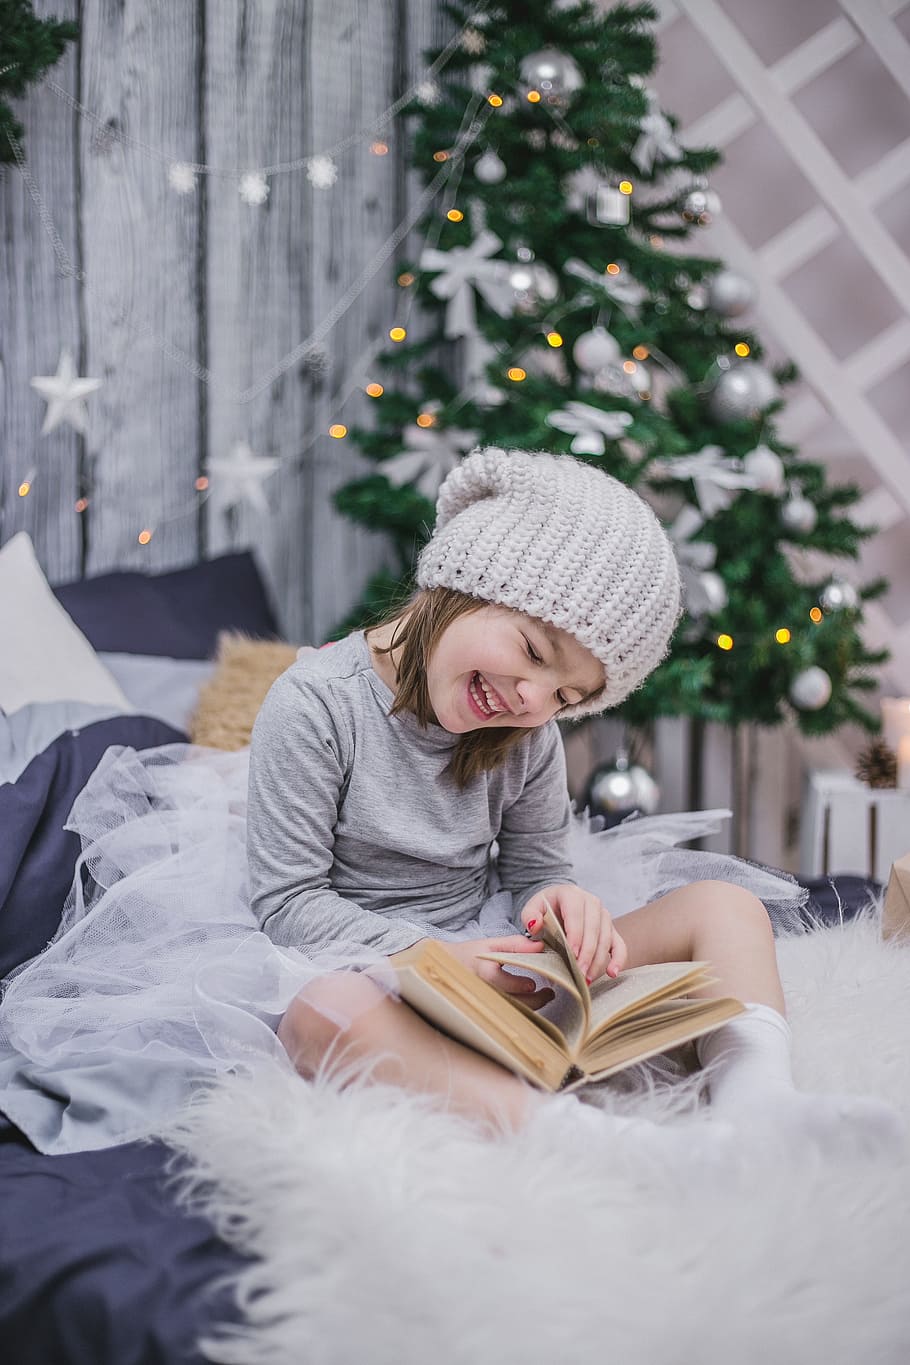 girl, gray, sweatshirt, kit cap, sitting, bed, new year's eve, kids, child with a book, new year